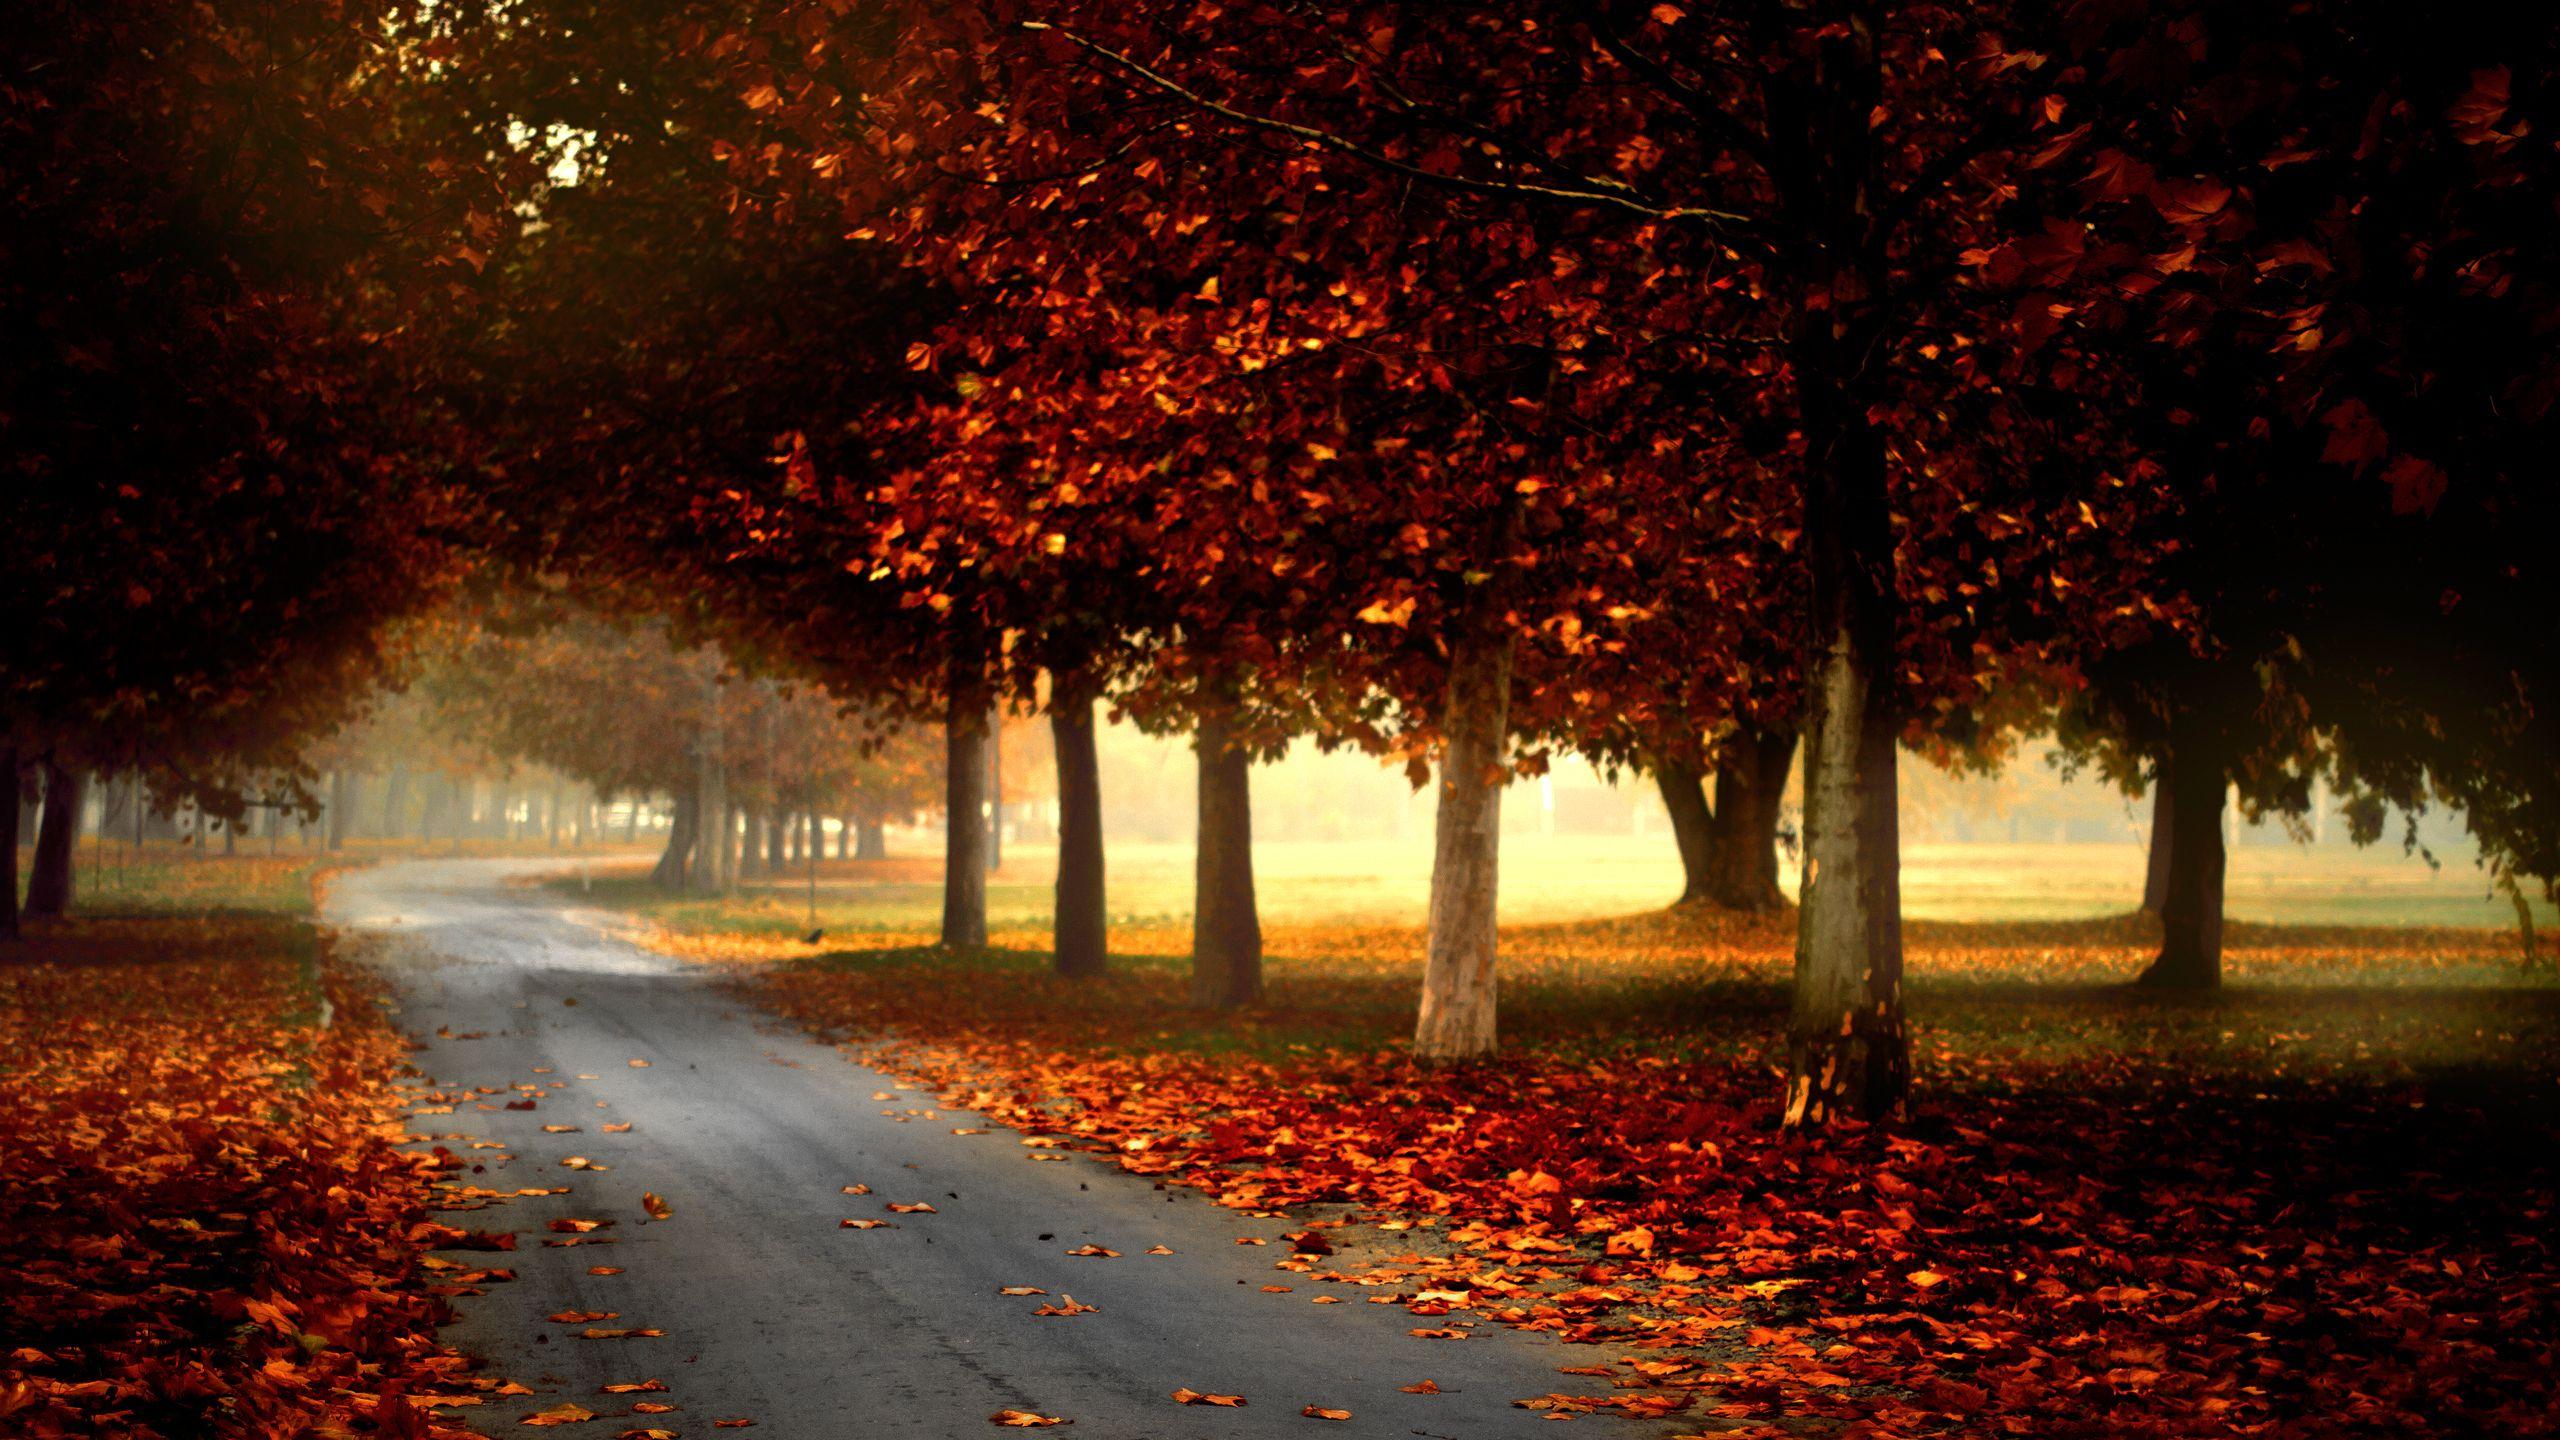 Country road in autumn wallpaper. Autumn wallpaper hd, Photography wallpaper, Forest landscape